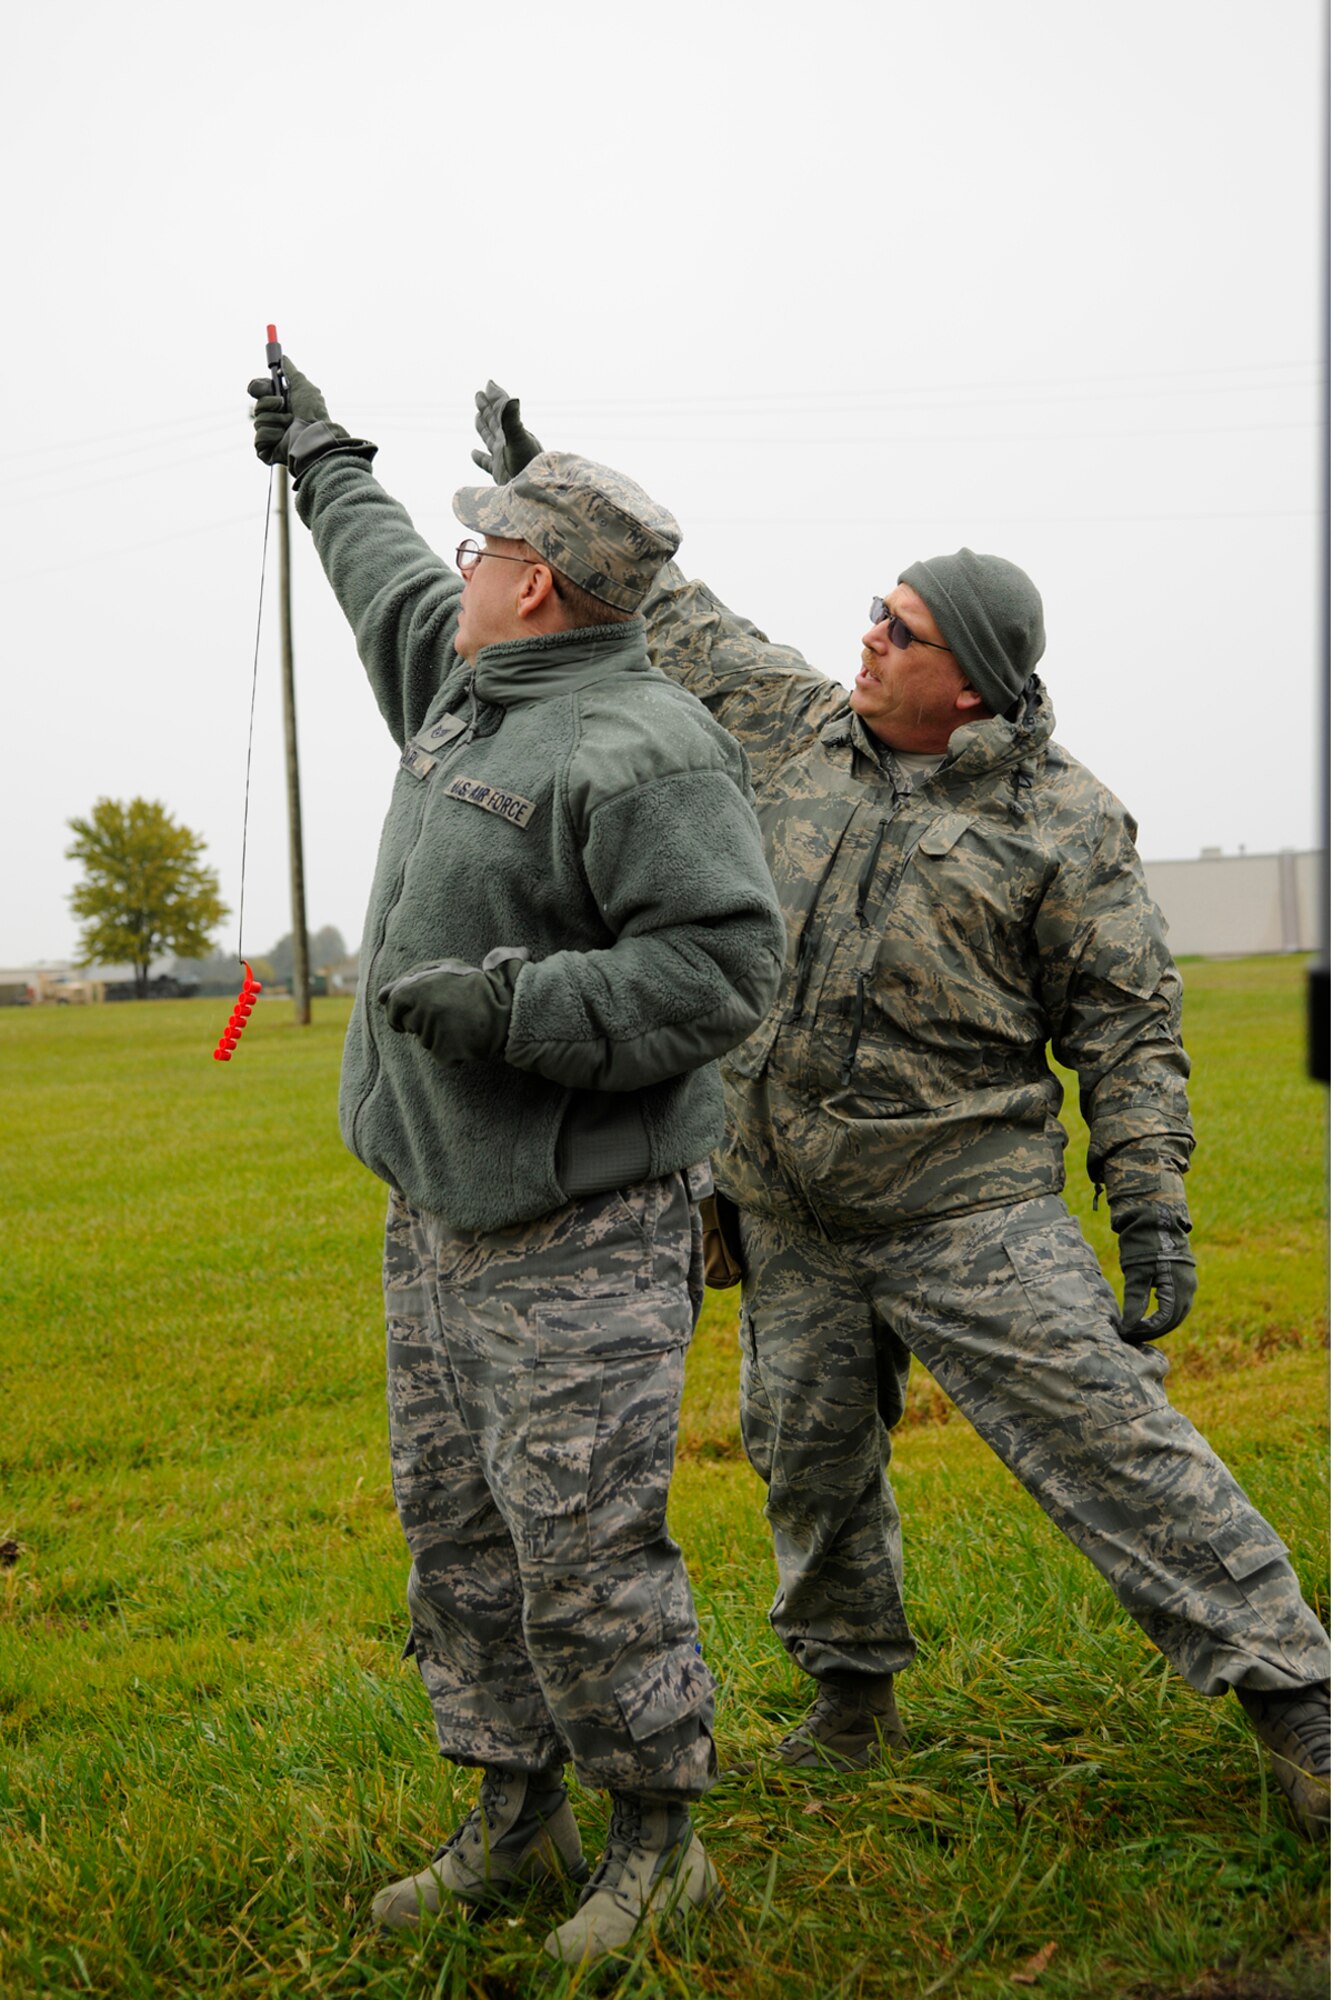 Master Sergeant James Ford of the 171st Air Refueling Squadron instructs Staff Sergeant Tom Clark from the 127th Logistics Readiness squadron on the proper way to fire a rescue flare at Selfridge Air National Guard Base, Mich., Oct. 13, 2012. Several flight crews participated in training using different survival tools such as the flare.   (U.S. Air Force photo by TSgt. David Kujawa)